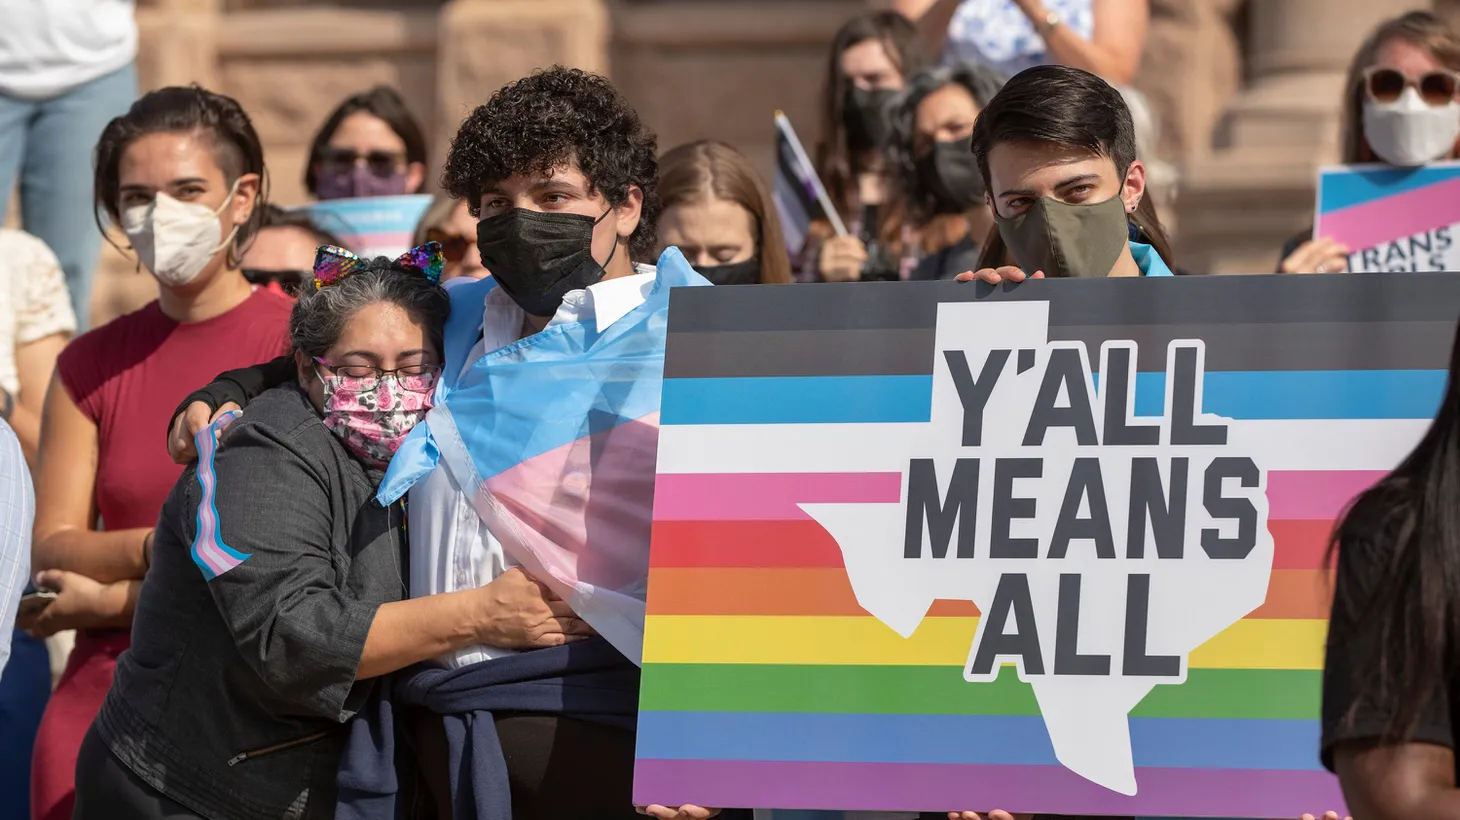 Texans gather to oppose anti-trans legislation in 2021. Last week, Texas Governor Greg Abbott announced a new policy equating gender-affirming care to child abuse.